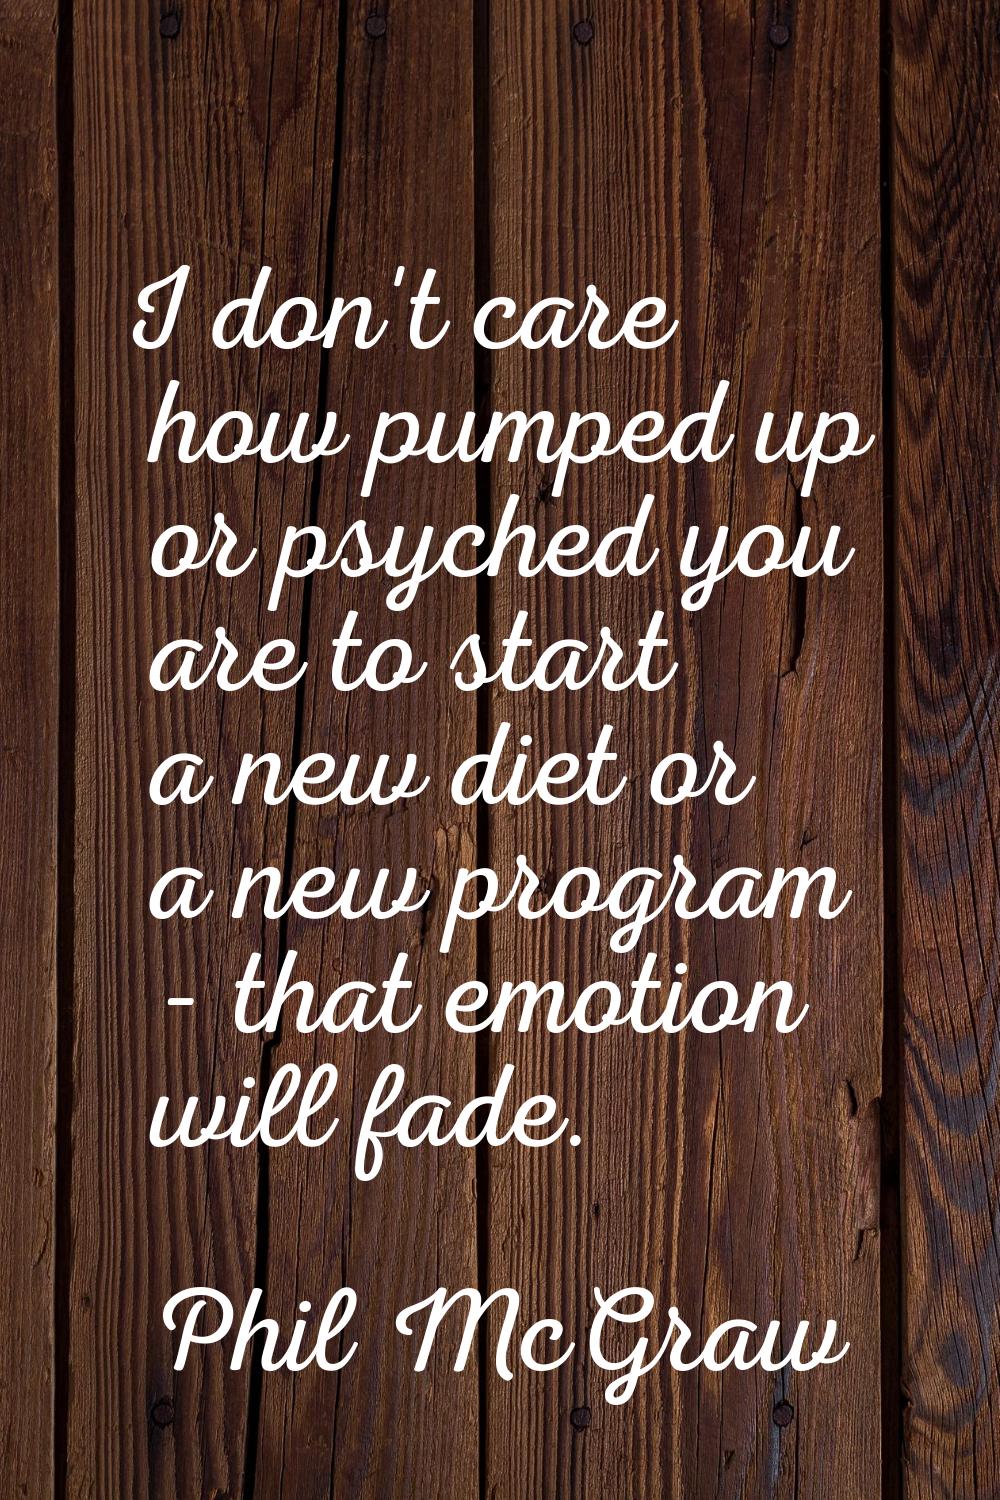 I don't care how pumped up or psyched you are to start a new diet or a new program - that emotion w